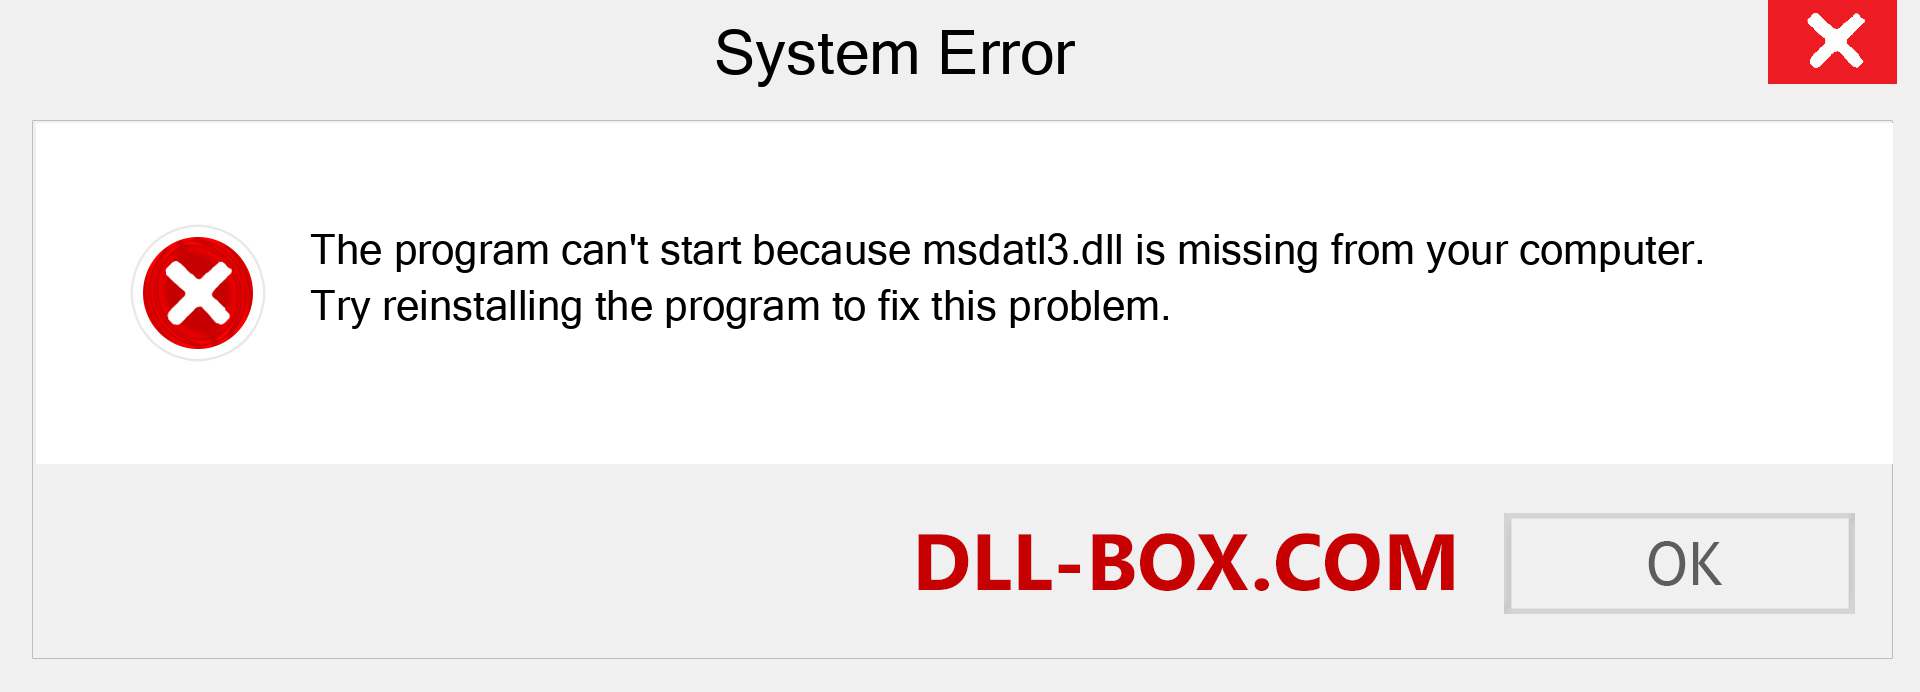  msdatl3.dll file is missing?. Download for Windows 7, 8, 10 - Fix  msdatl3 dll Missing Error on Windows, photos, images